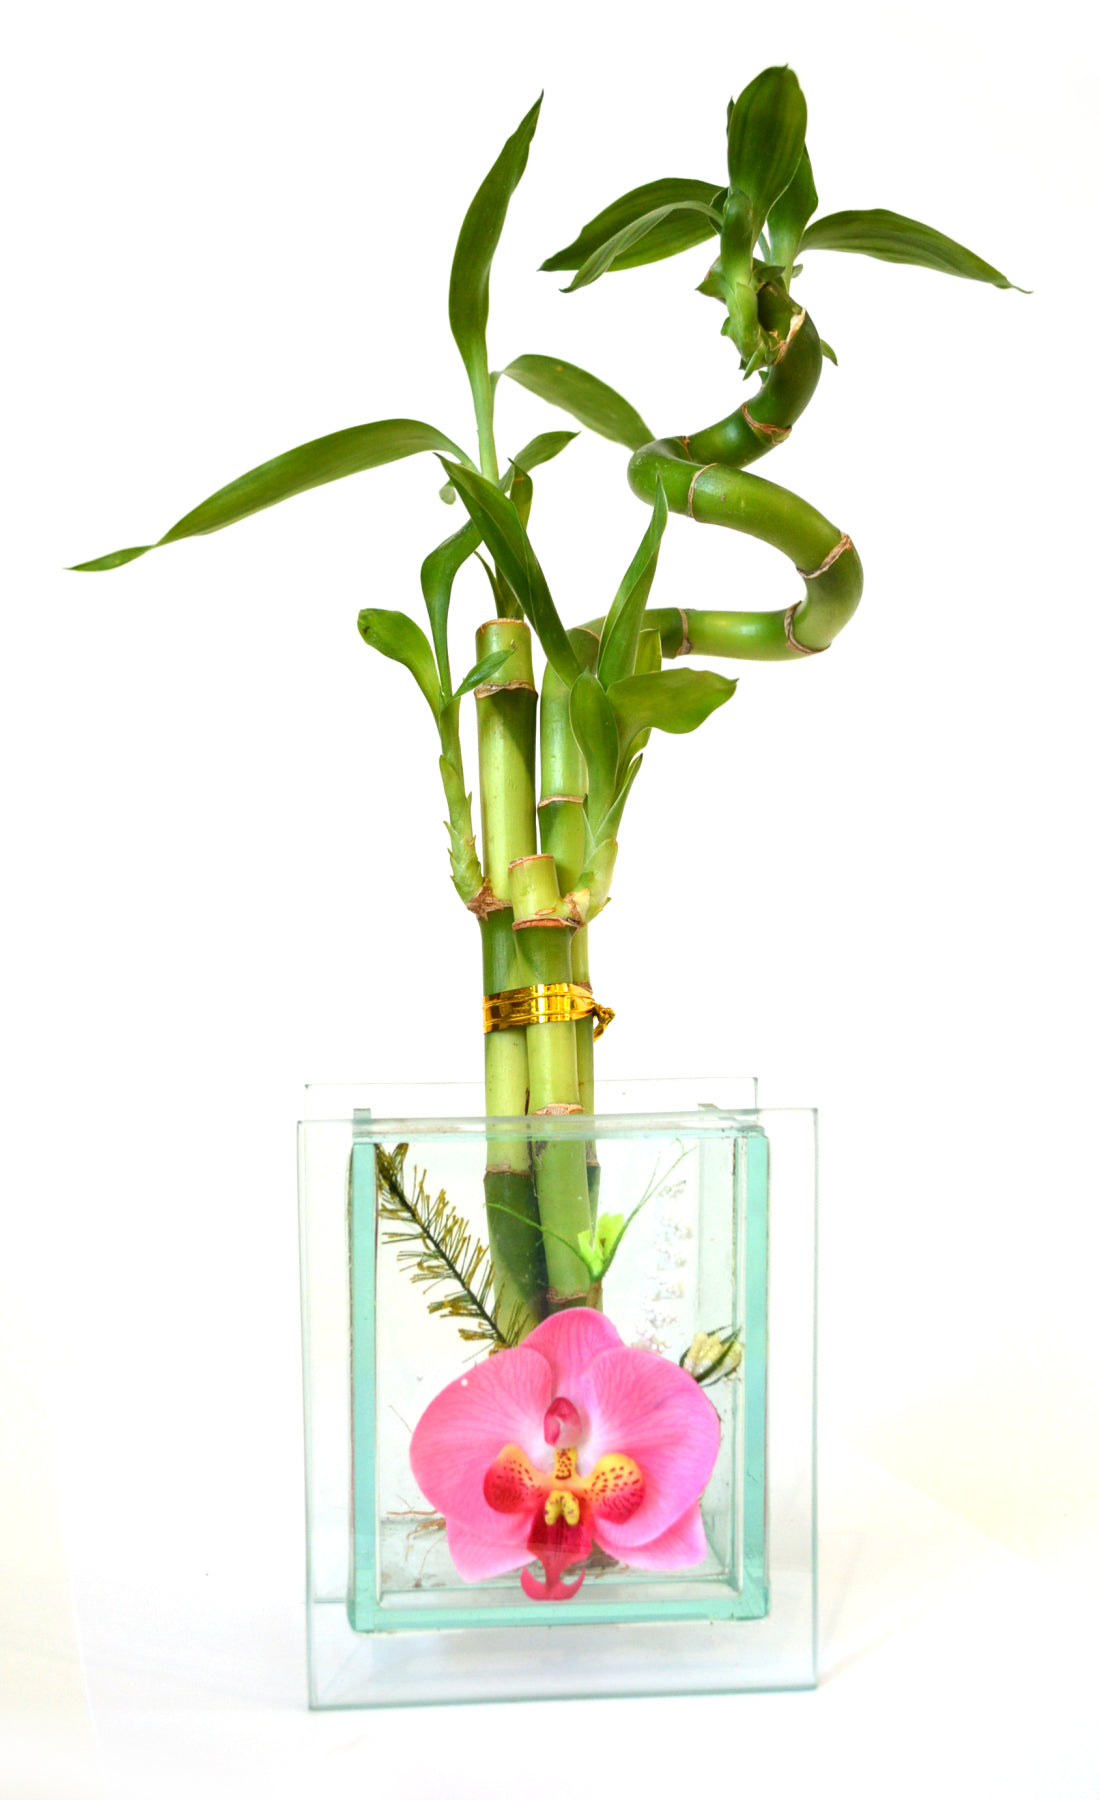 9GreenBox - Live 3 Style Lucky Bamboo Plant Arrangement with Glass Orchid Vase - 9GreenBox